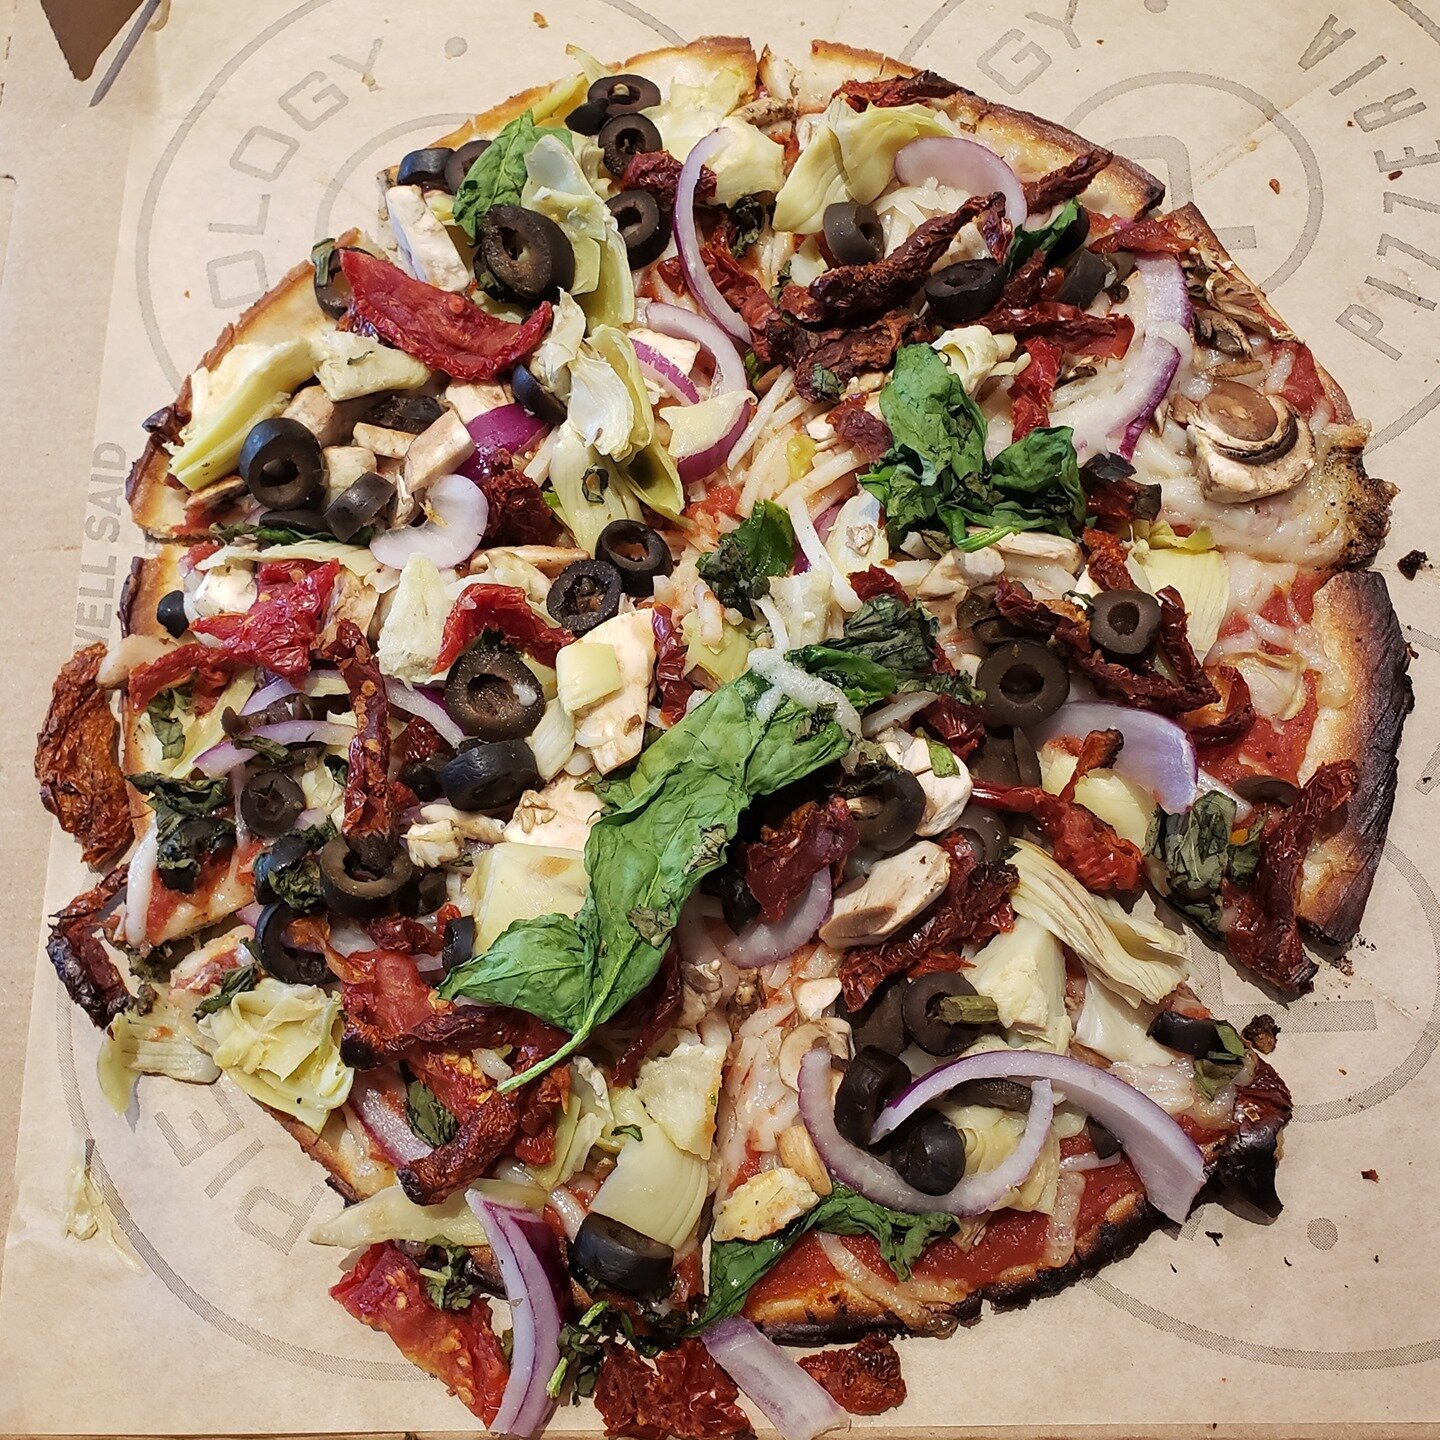 It's not always easy to find gluten free vegan pizza but this one was good! One of my favorite tricks is to load it with toppings! So delicious &amp; filling. Plus, lots of plants!!

Pieology in El Paso, Texas